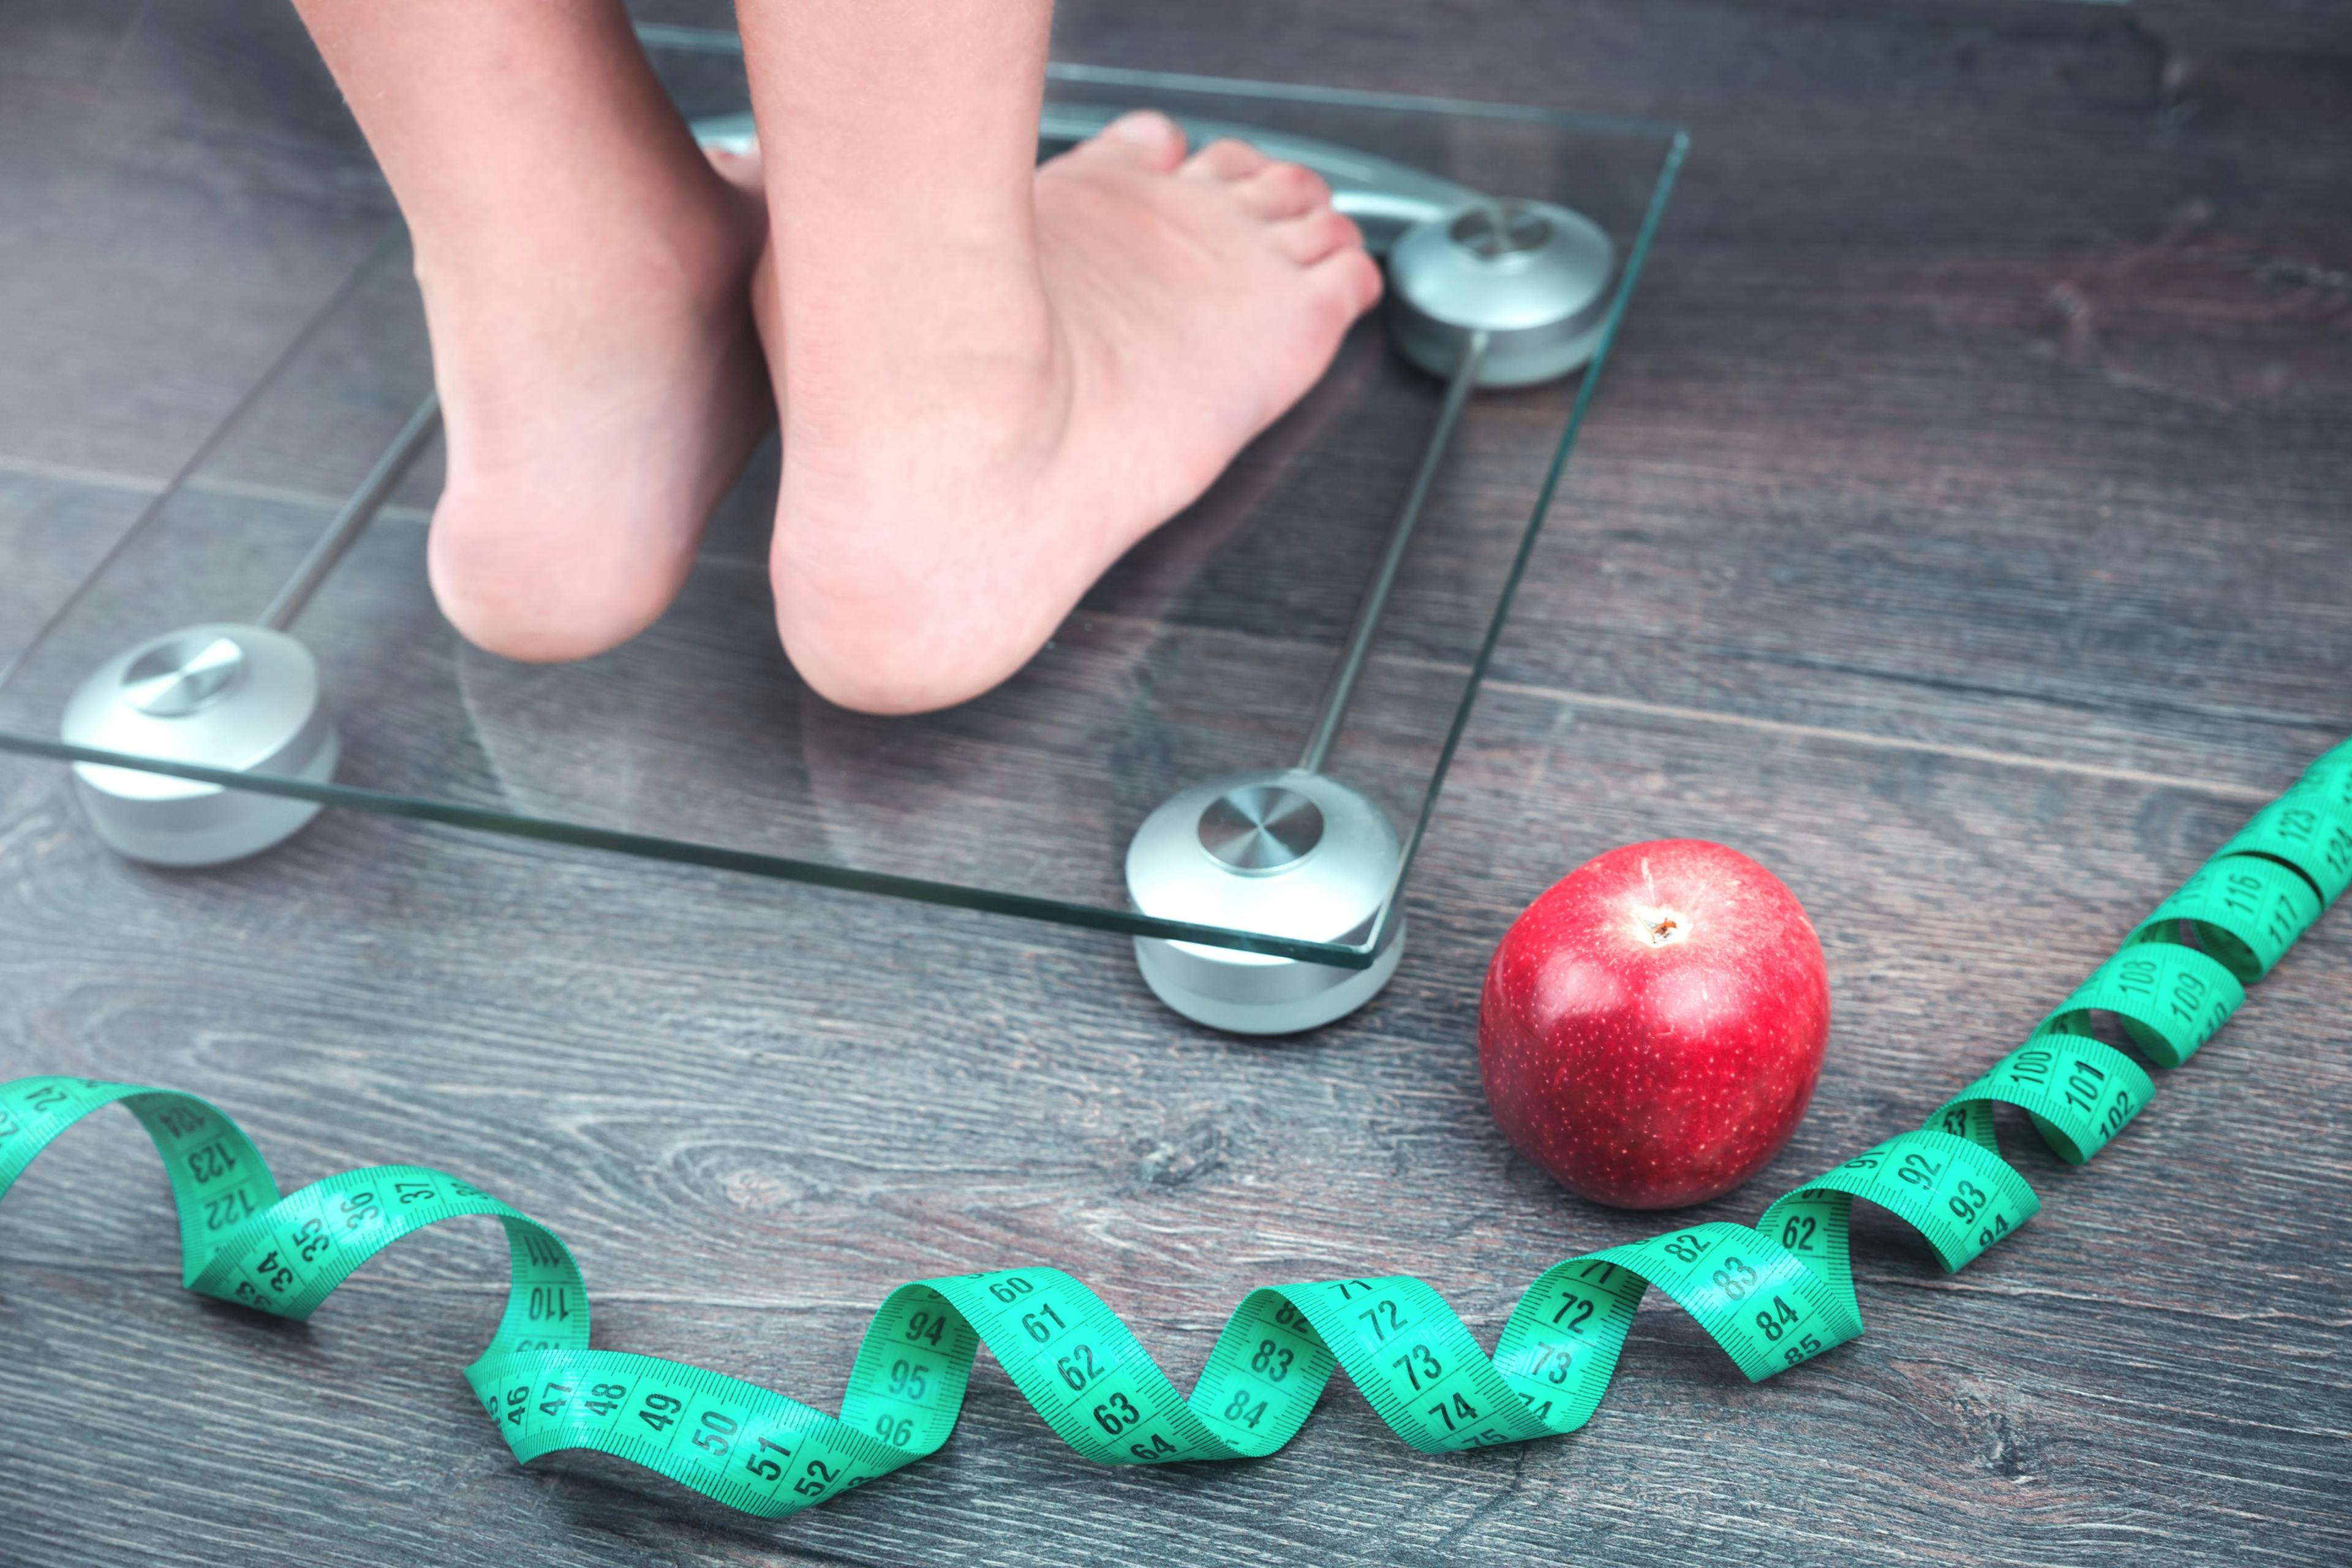 Pfizer Advances Oral GLP-1 Development as the Race for Second-Gen Obesity Therapies Continues 